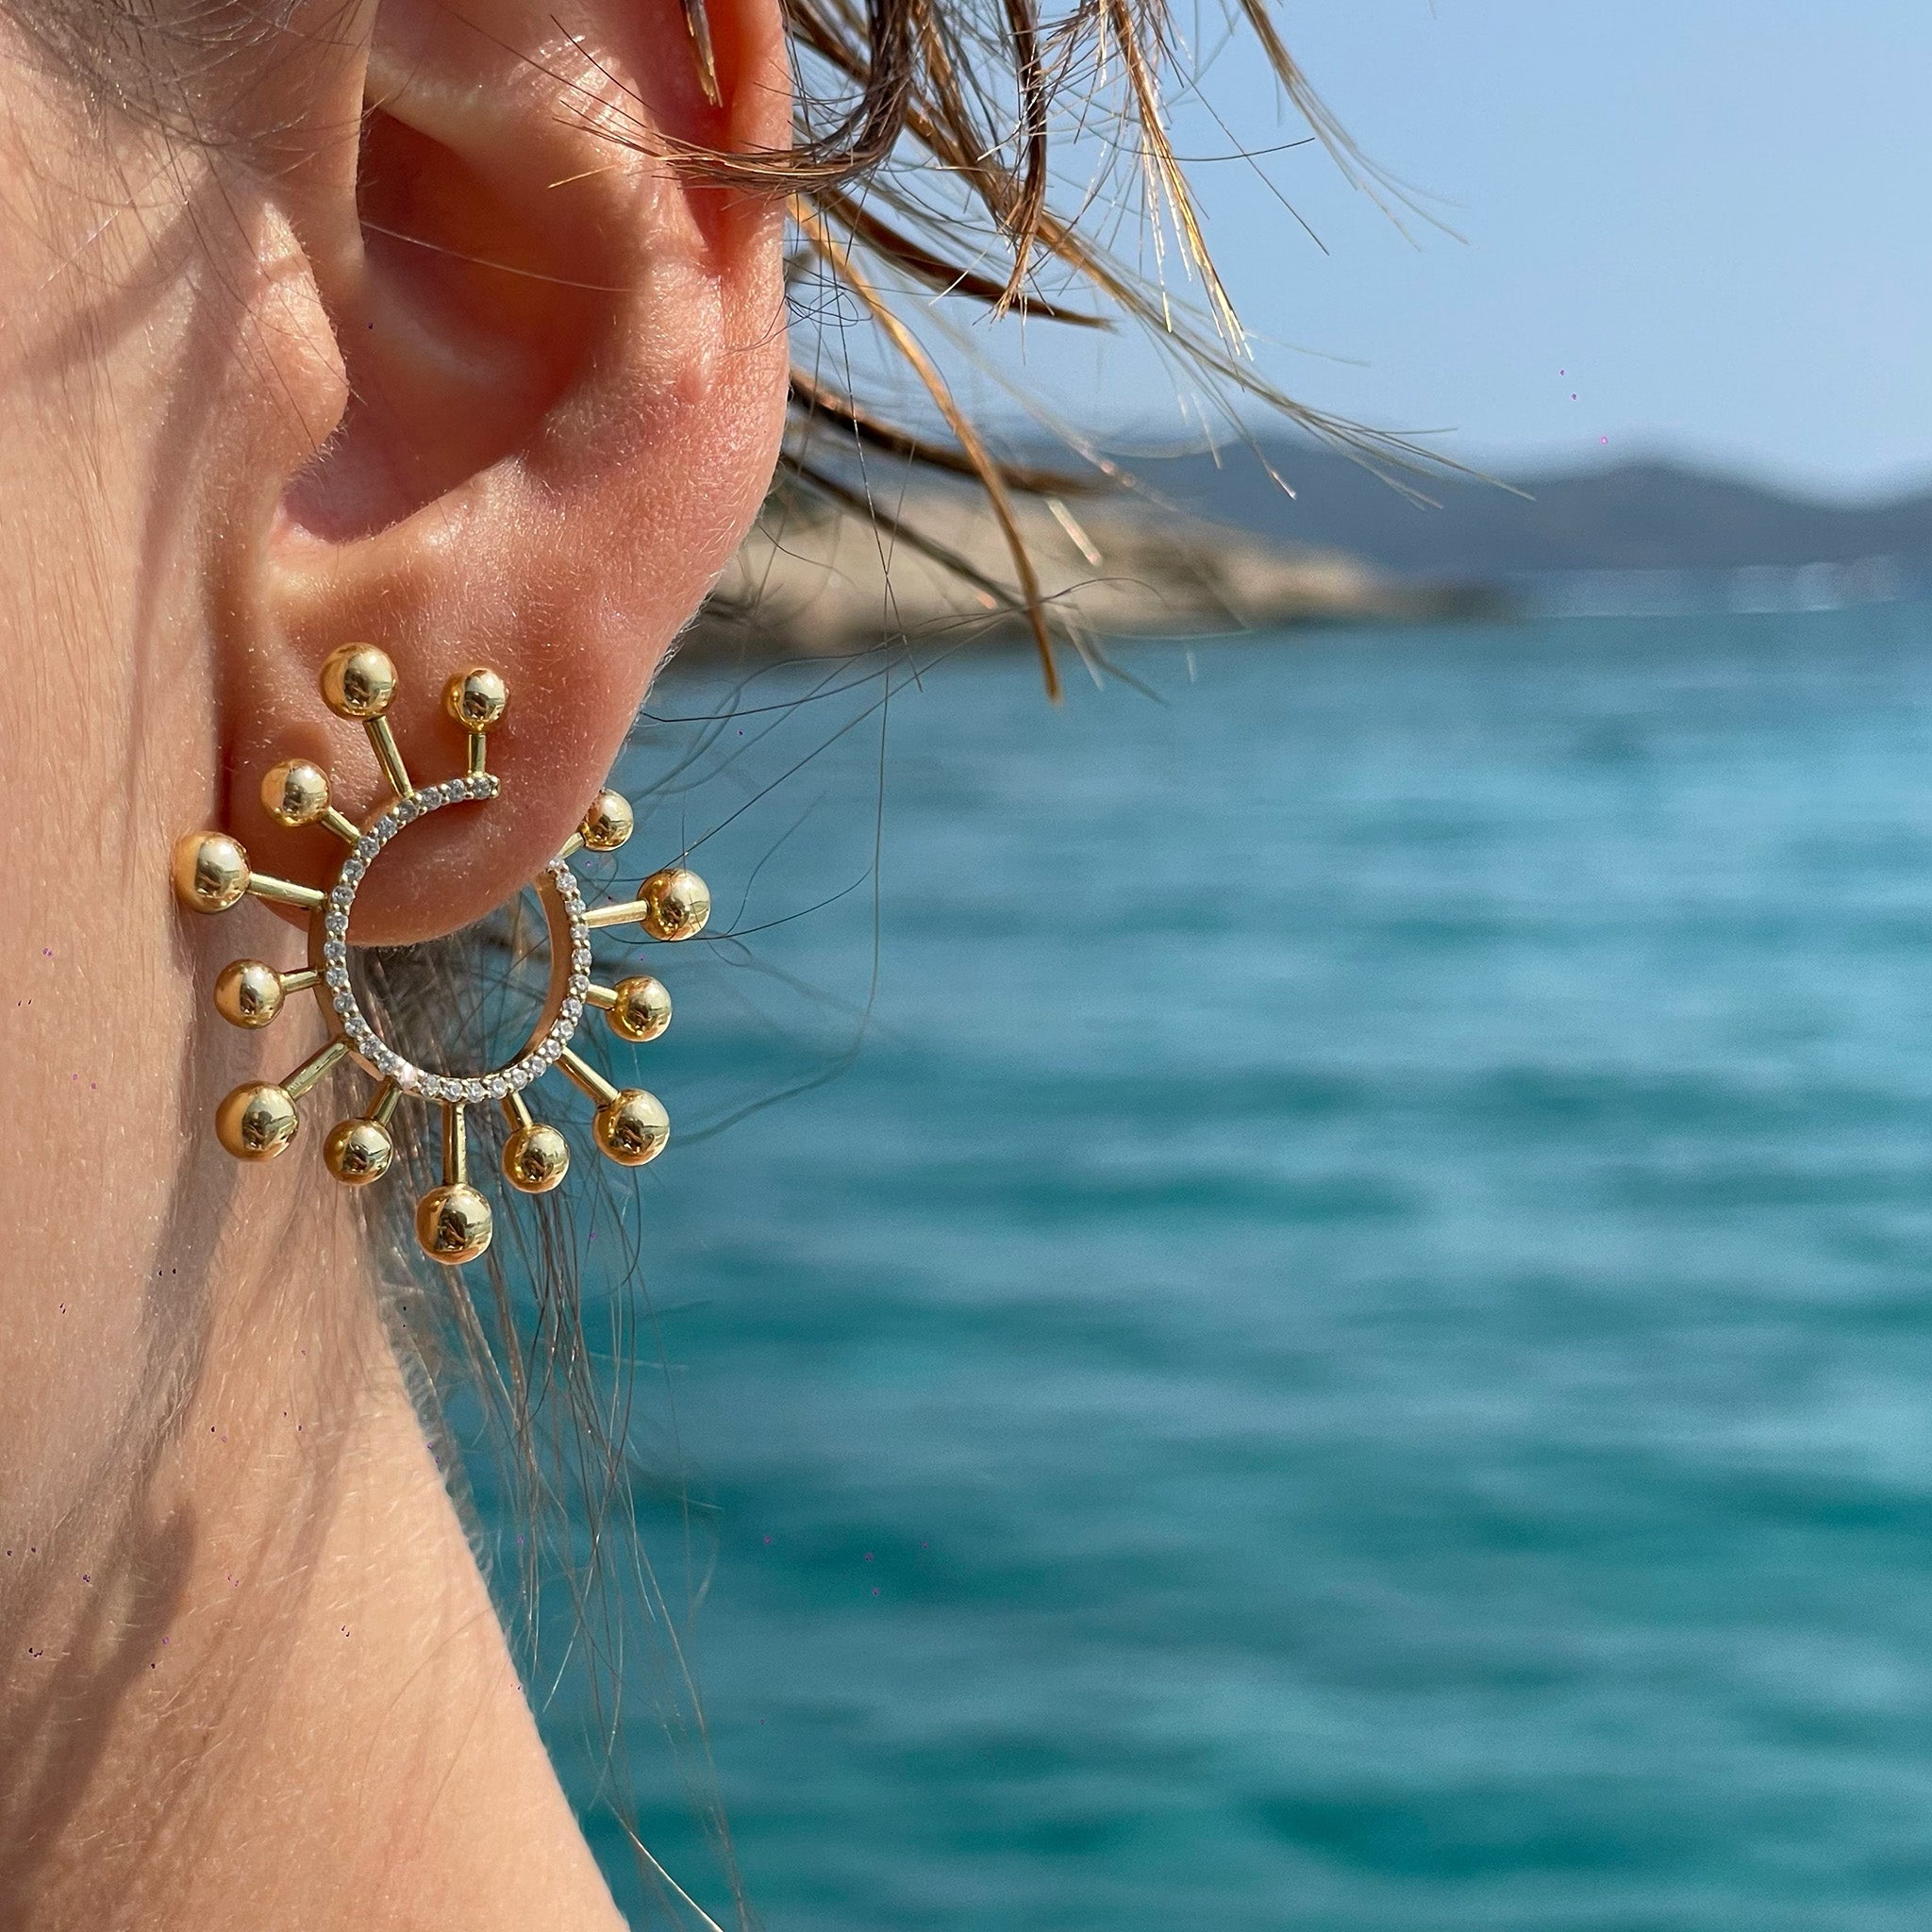 Yellow gold earrings elegantly worn by a model with a serene sea background.